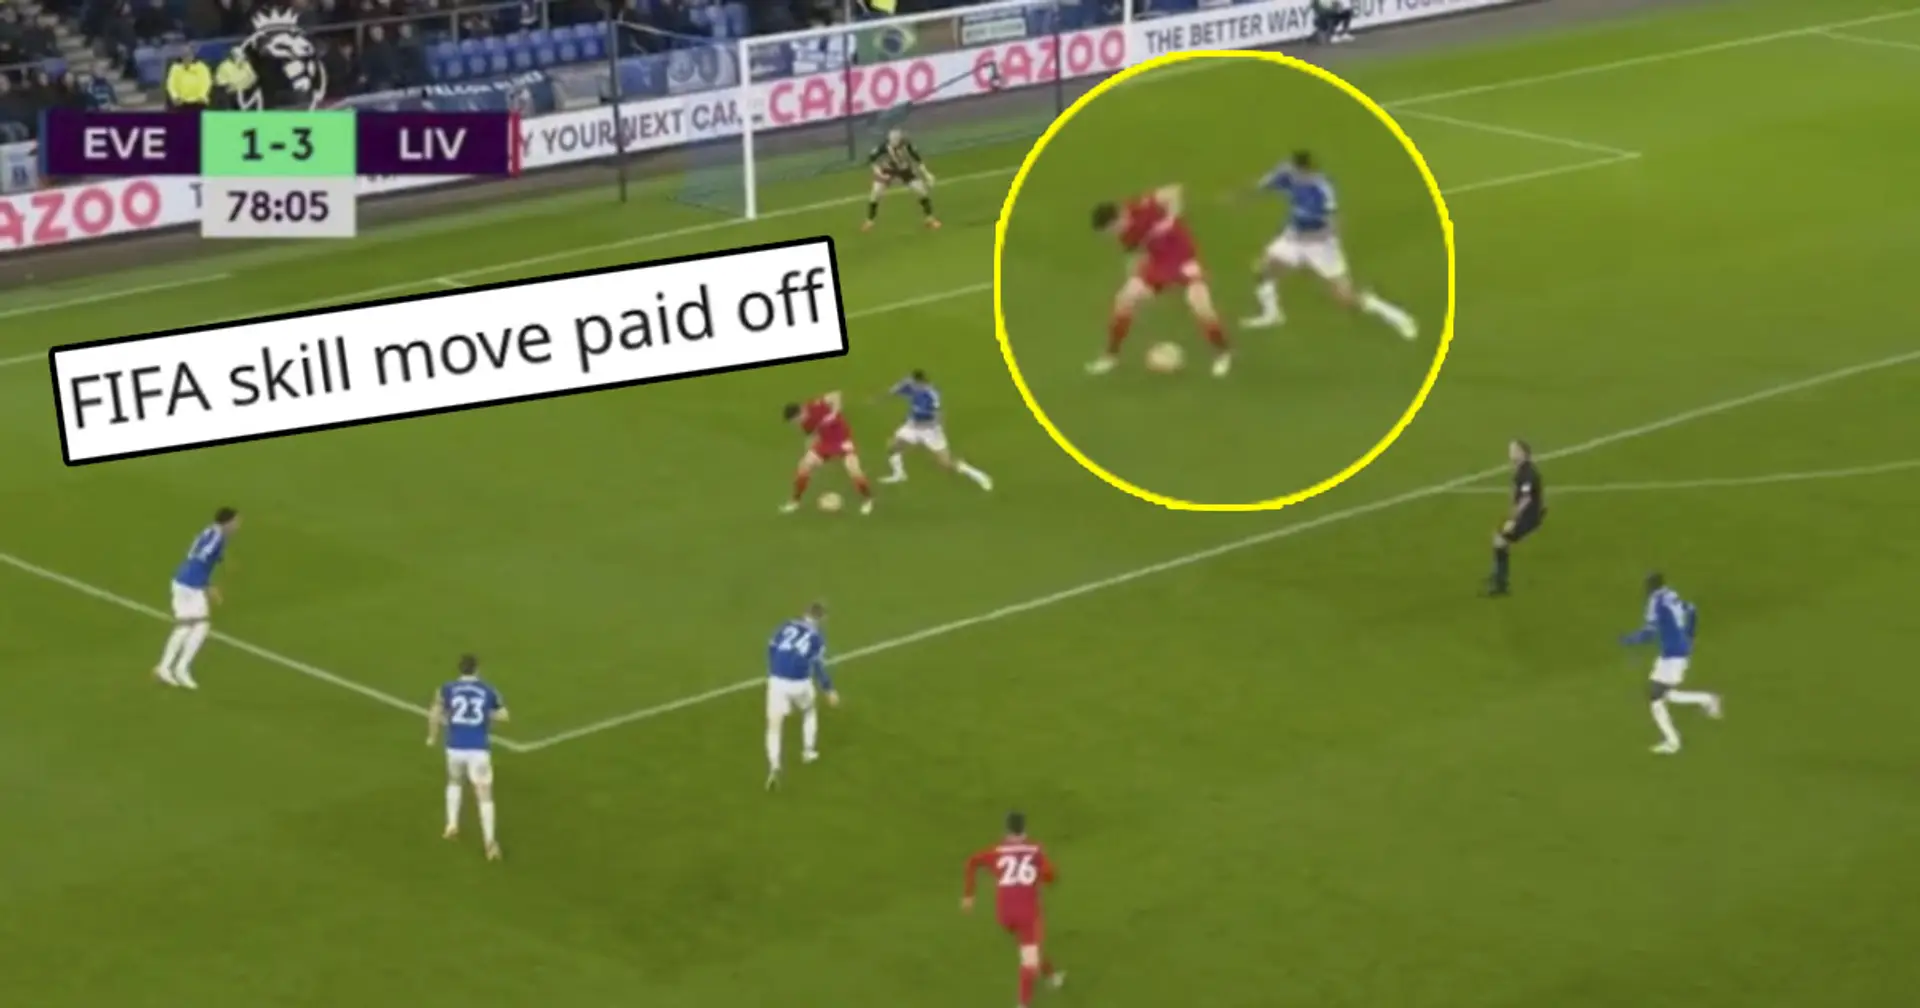 'Ballon d'Or was a week early': Liverpool fans and neutrals react to Jota strike vs Everton